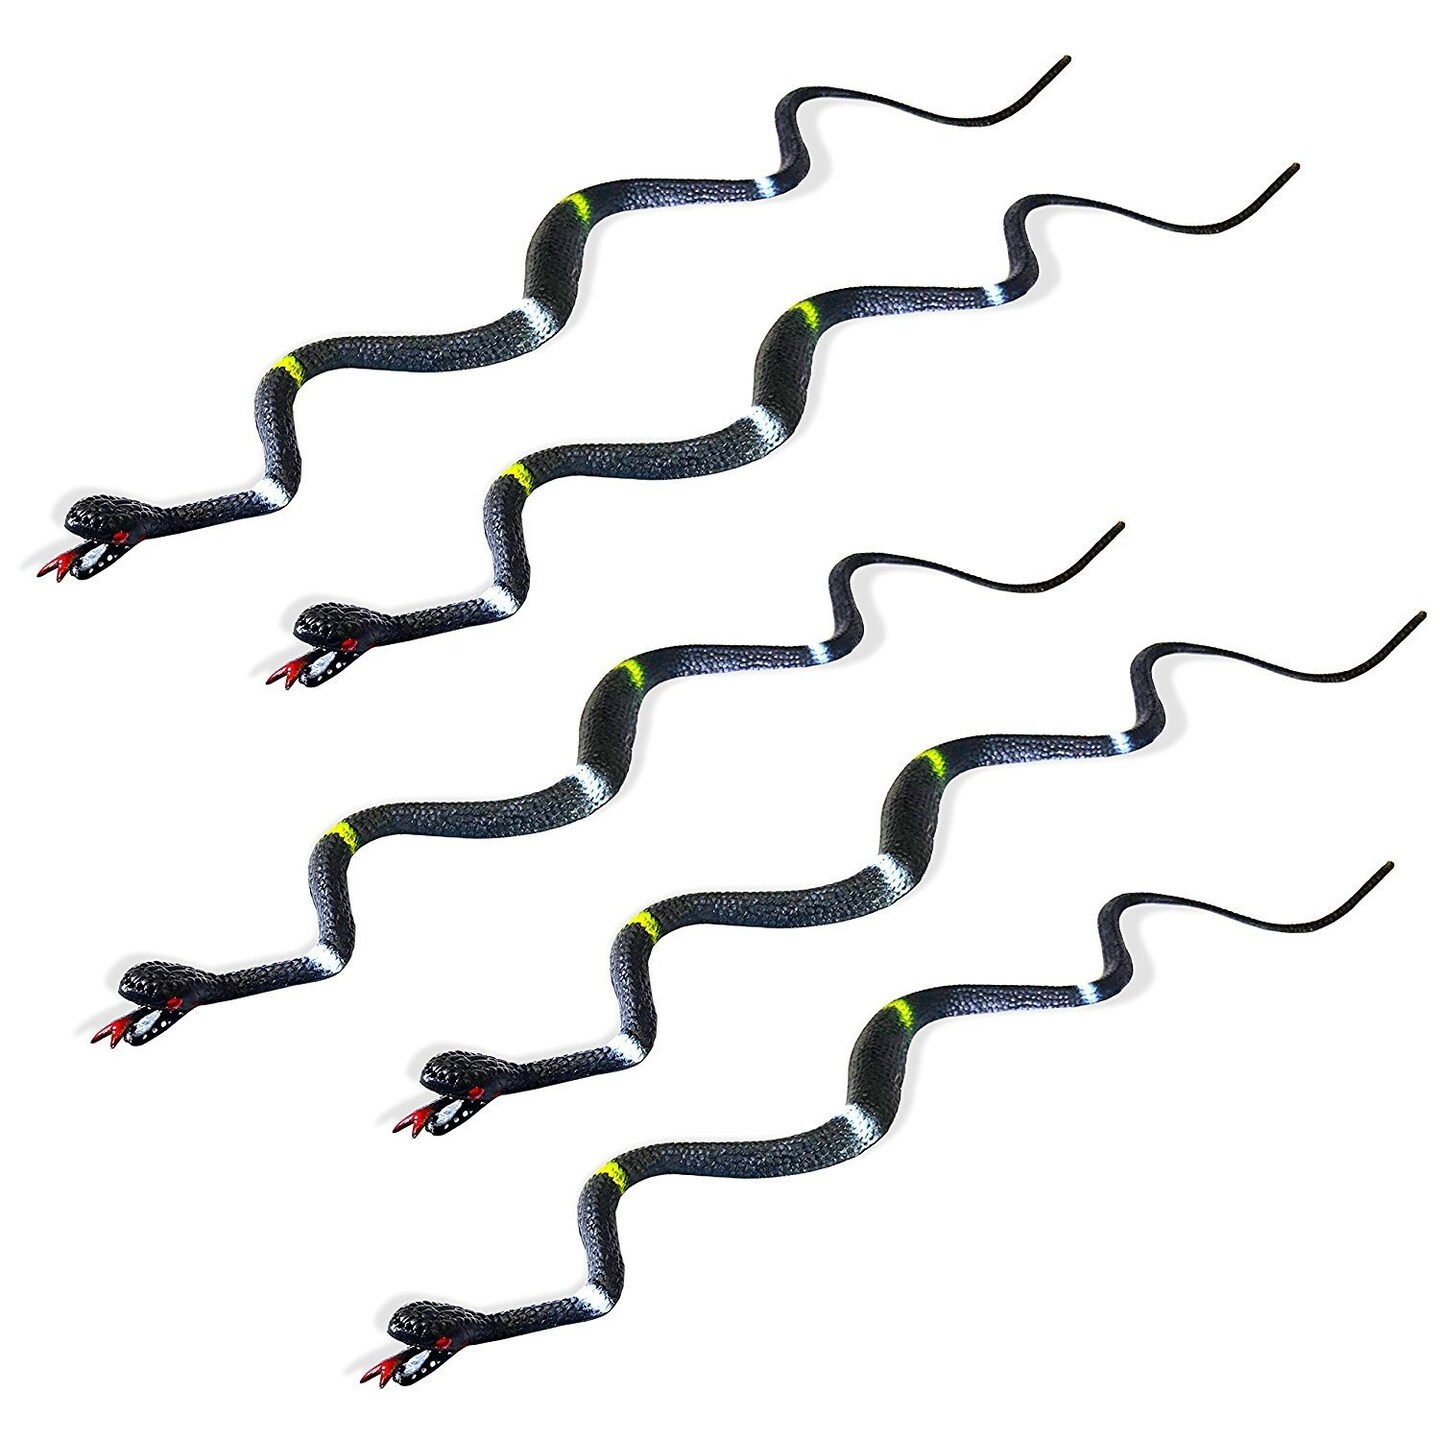 12 Pack Toy Vinyl Snakes For Party, Party Favors by Big Mos Toys